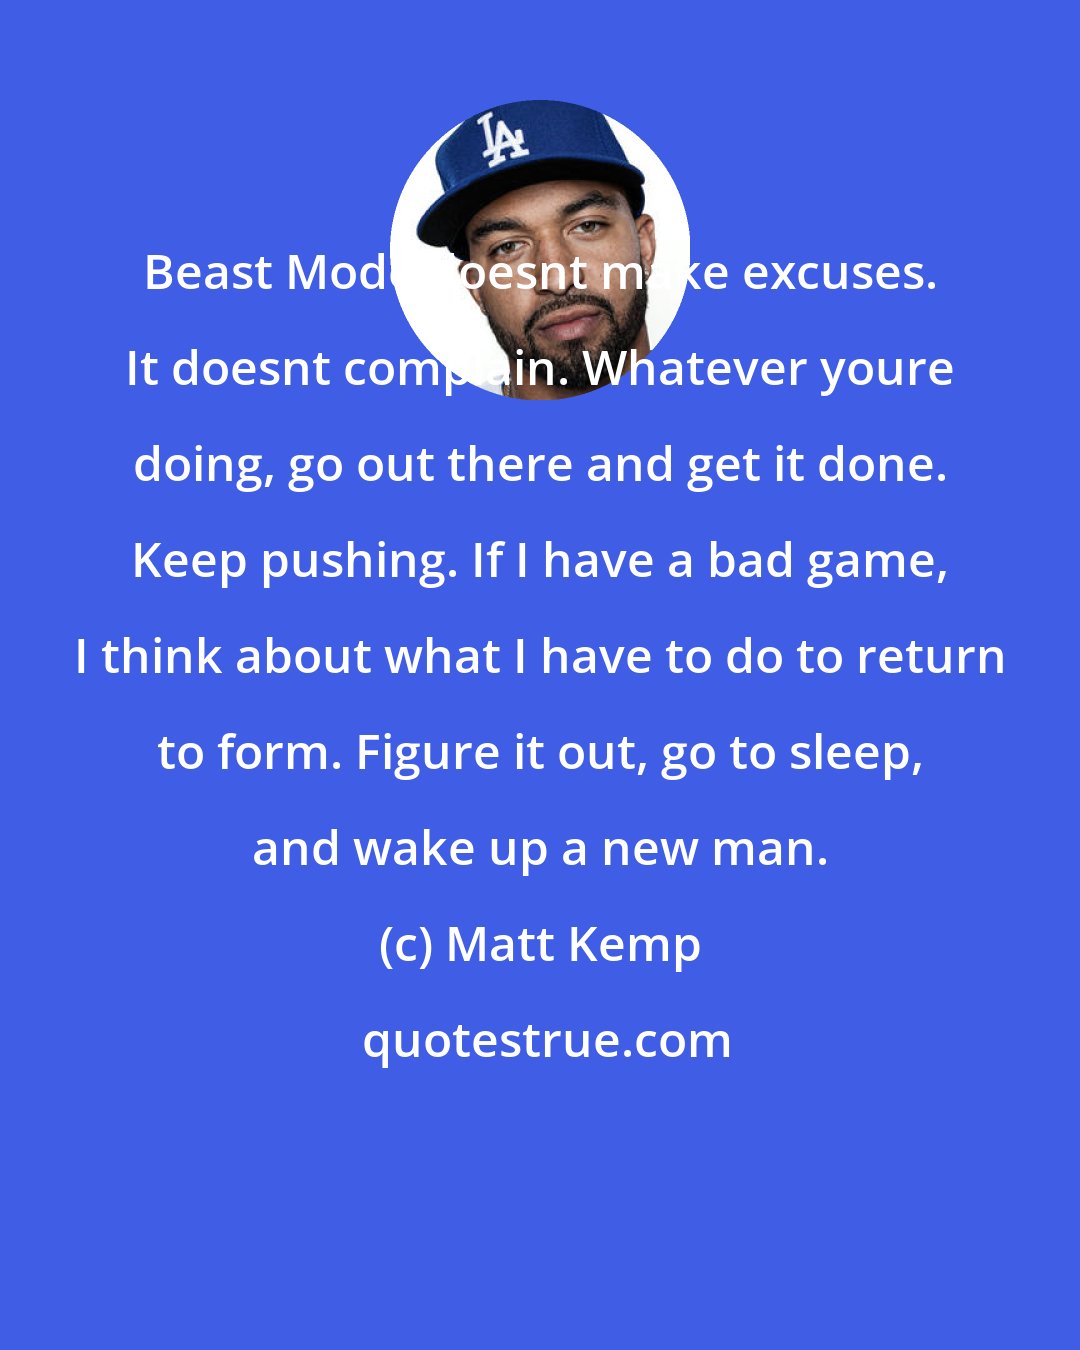 Matt Kemp: Beast Mode doesnt make excuses. It doesnt complain. Whatever youre doing, go out there and get it done. Keep pushing. If I have a bad game, I think about what I have to do to return to form. Figure it out, go to sleep, and wake up a new man.